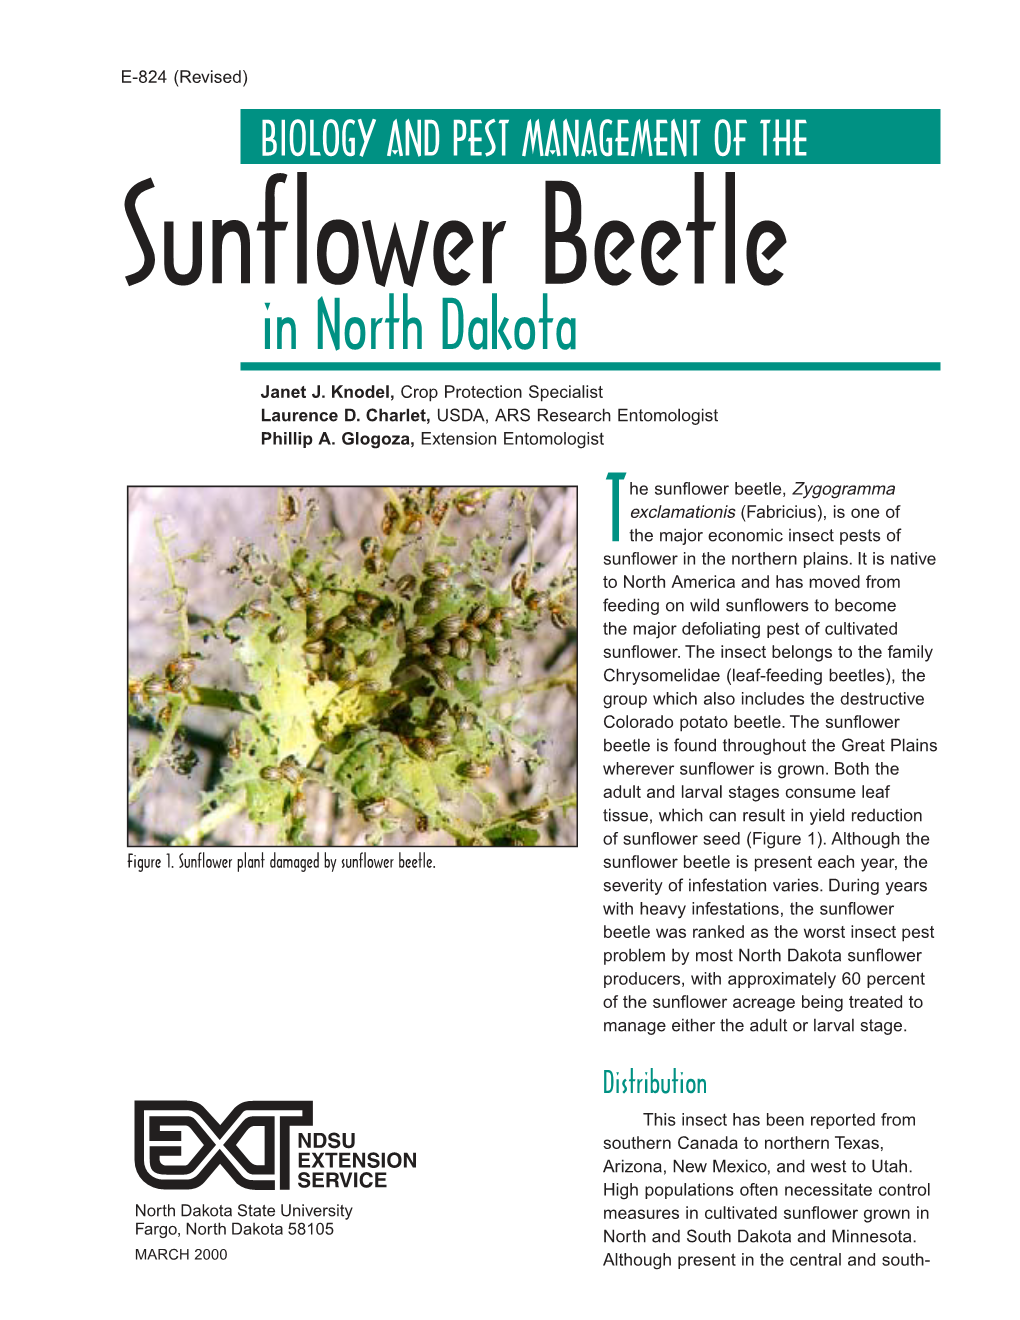 Biology and Pest Management of the Sunflower Beetle of North Dakota